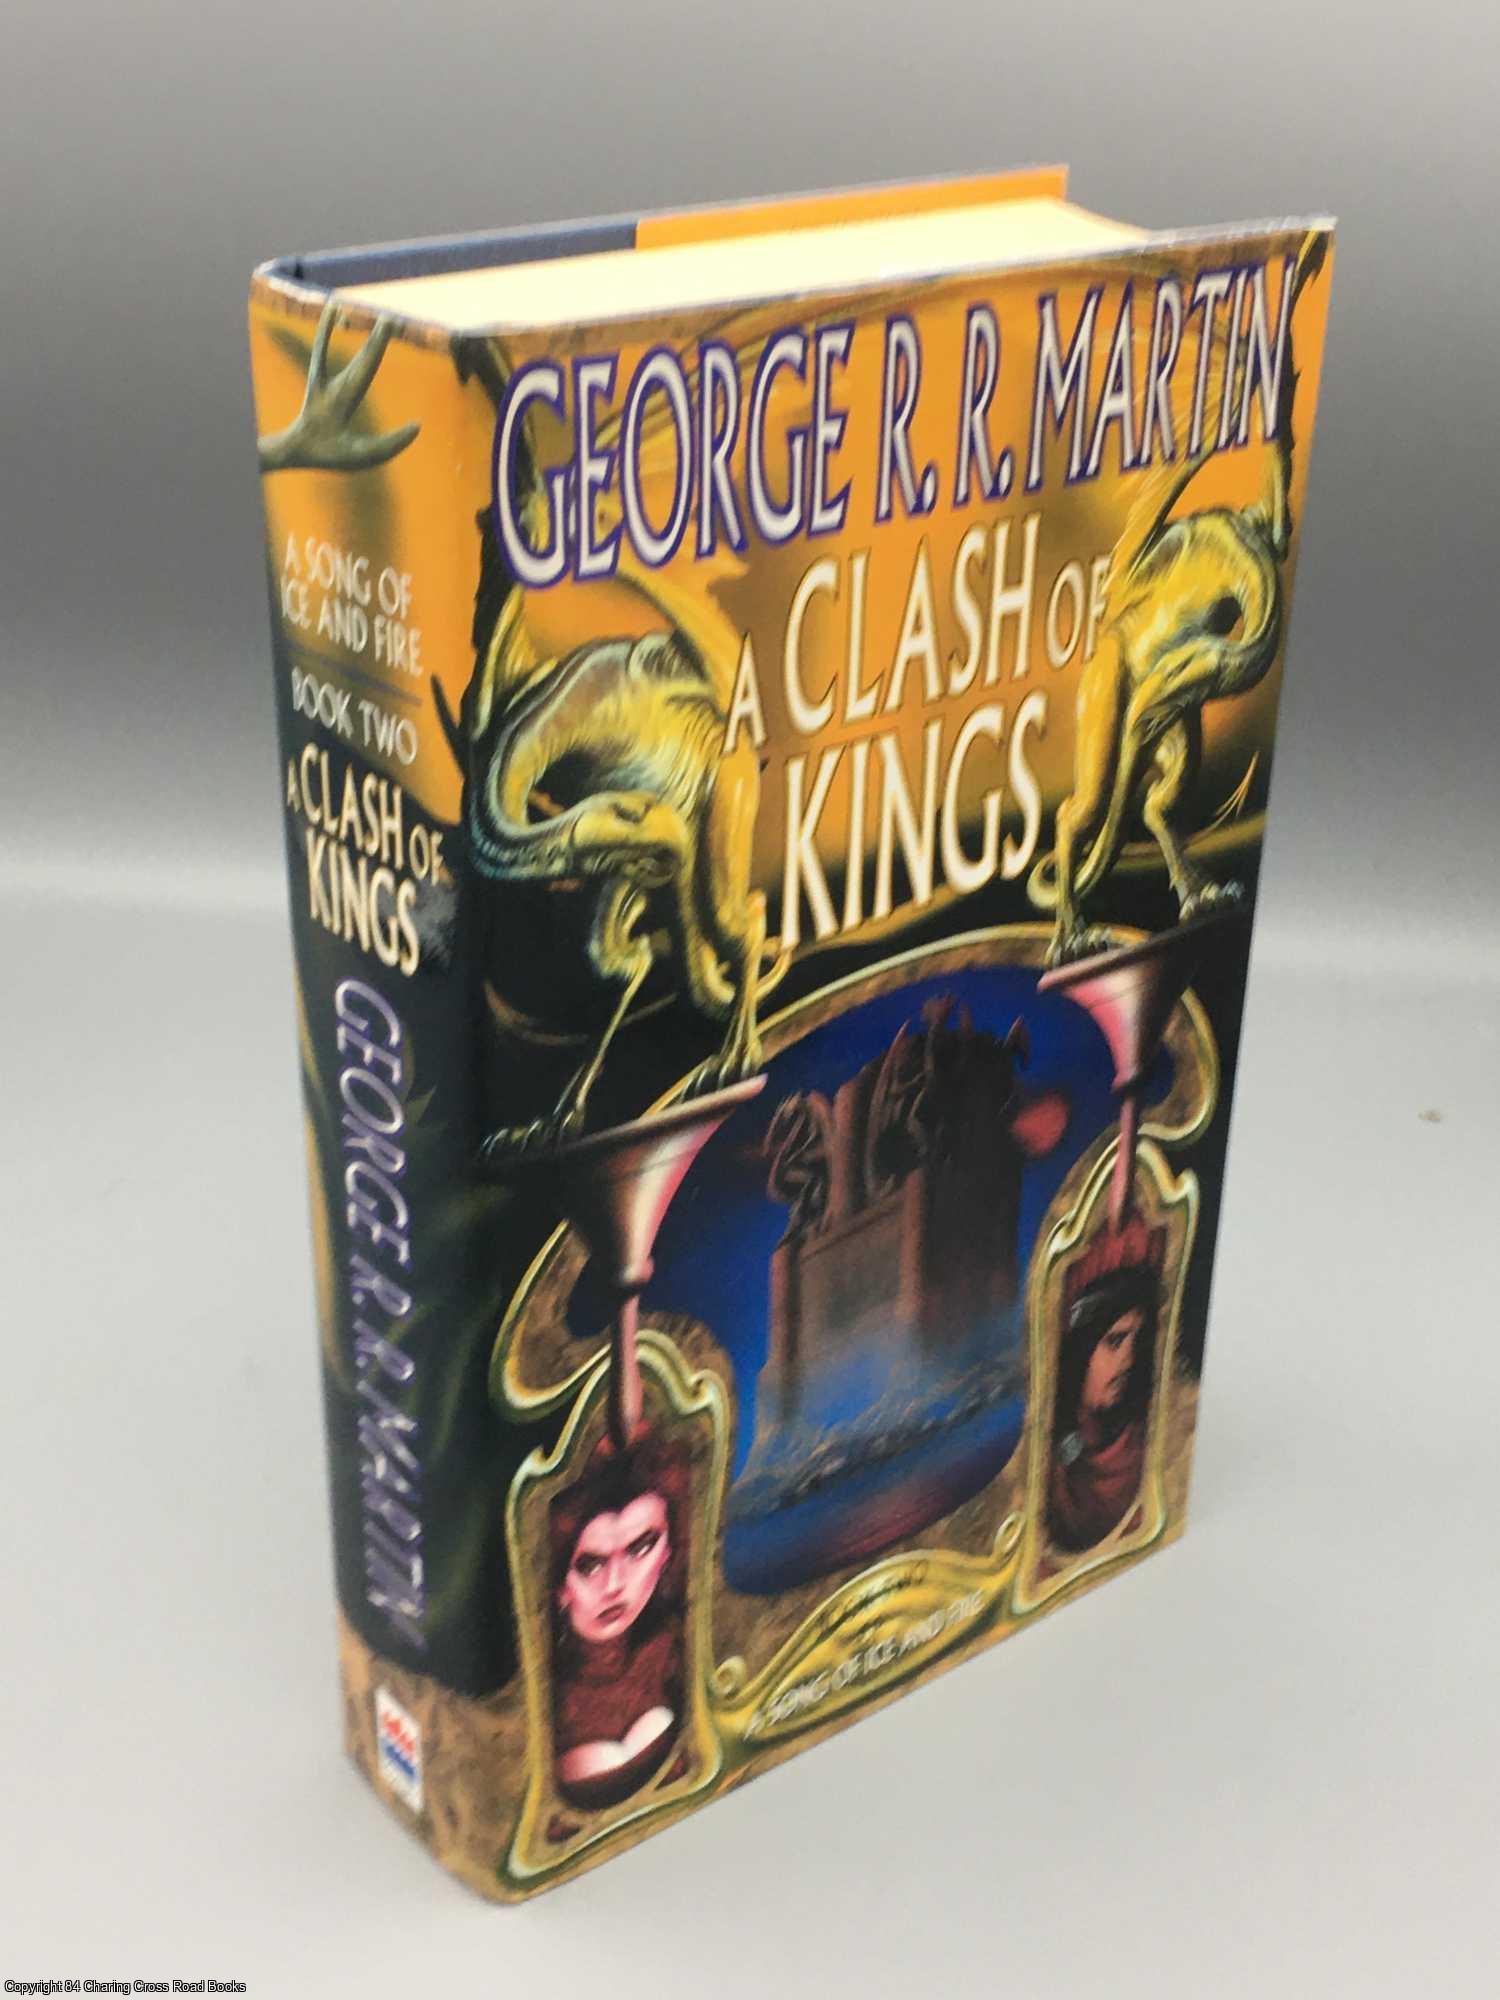 A Clash Of Kings, Book Two By George R. R. Martin - 1st Edition 1st Print -  1999